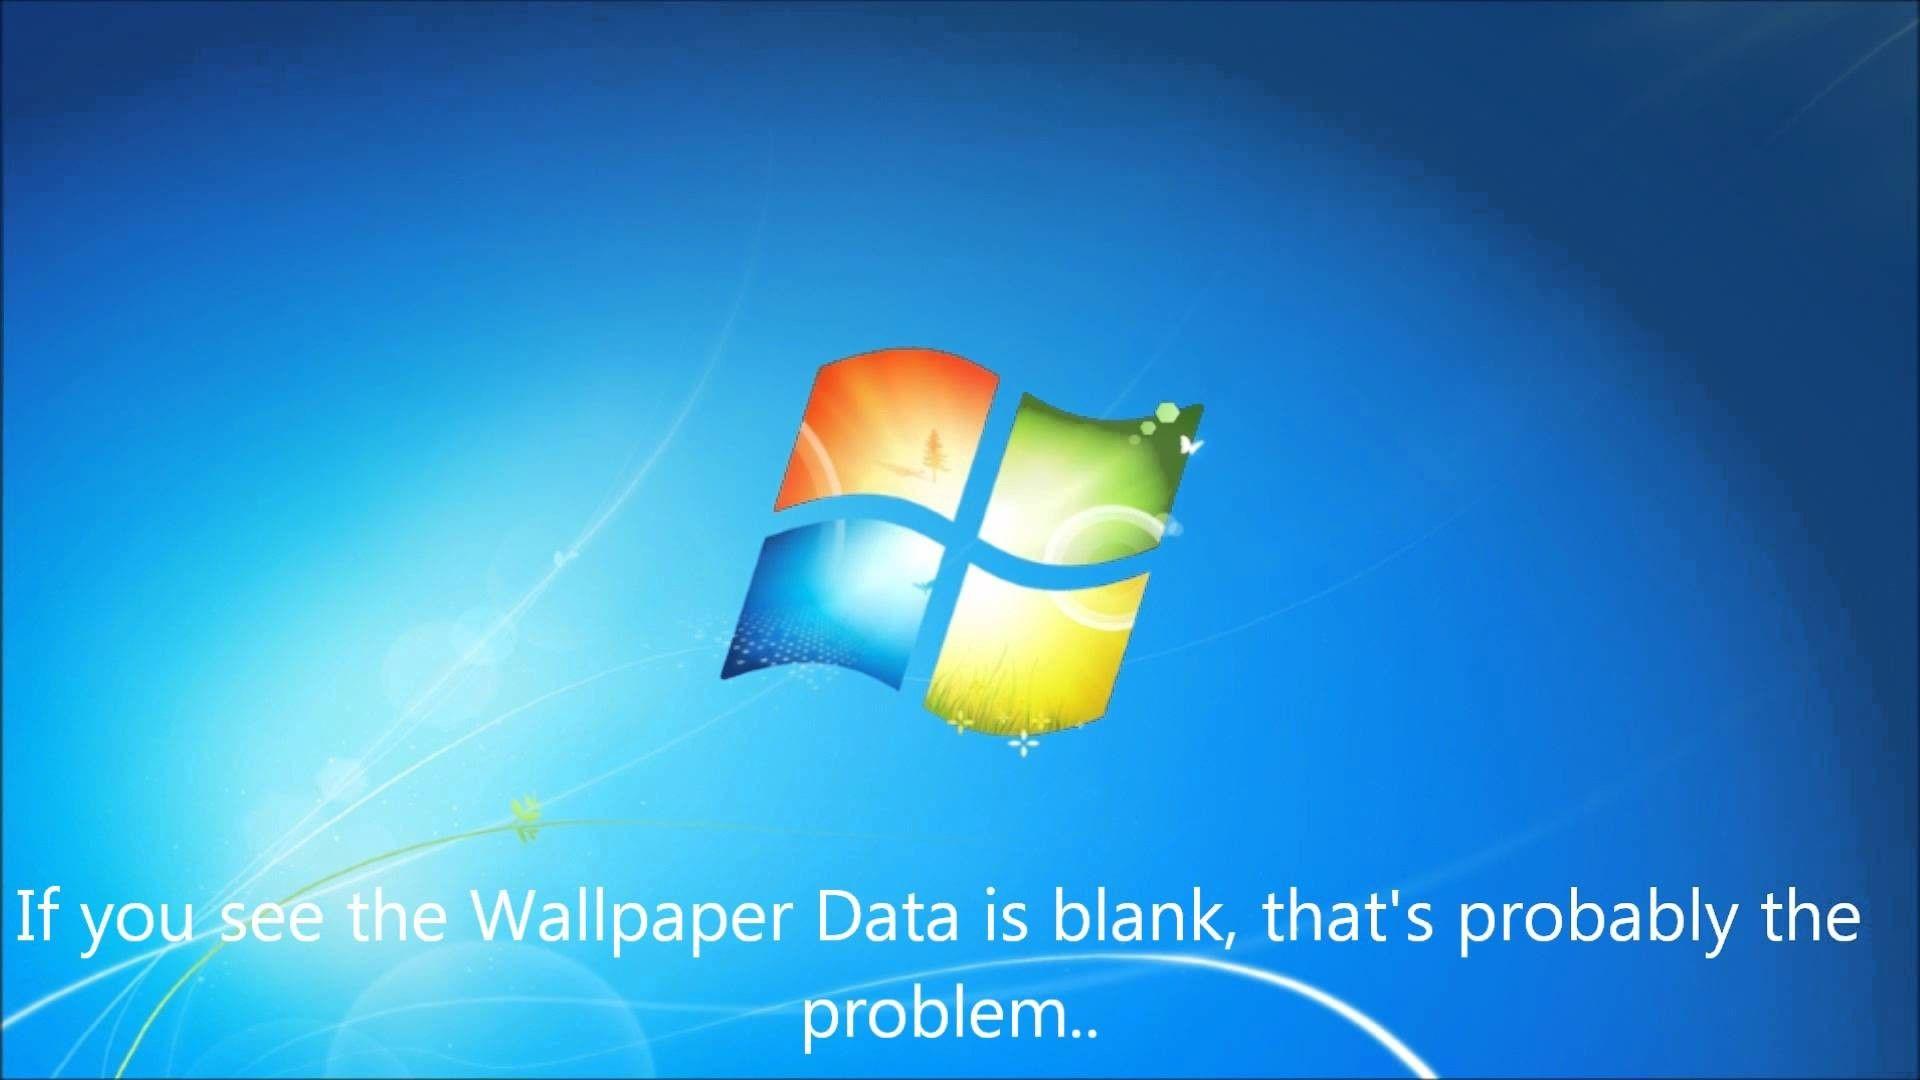 Blue Screen of Death Background